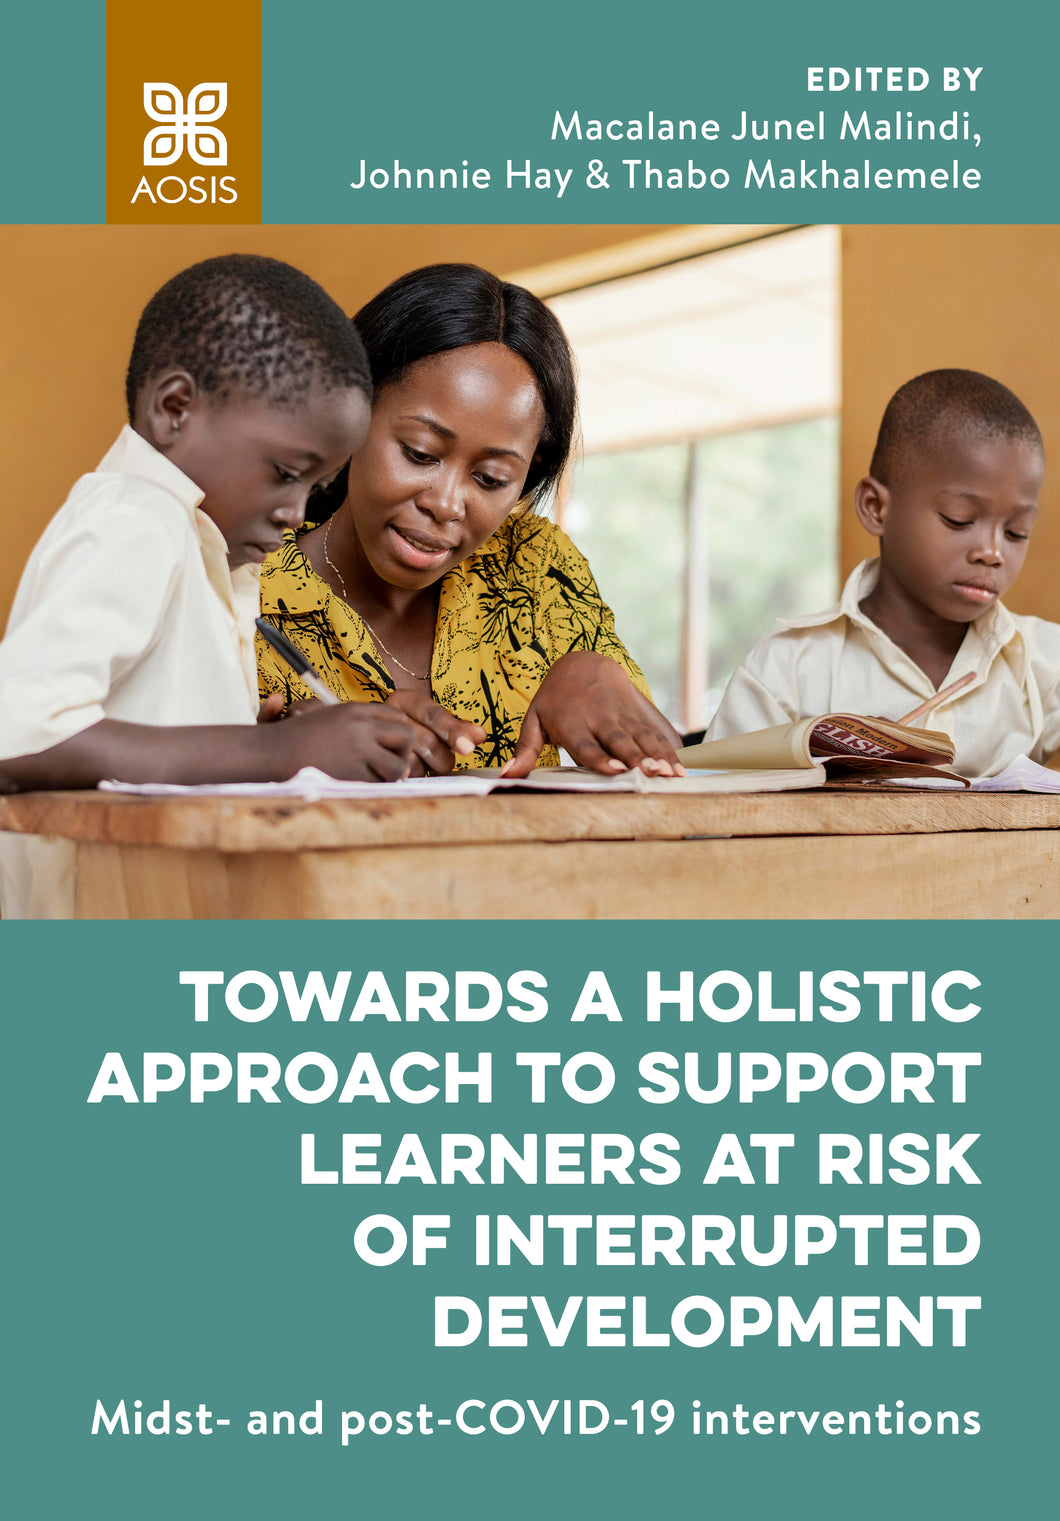 Towards a holistic approach to support learners at risk of interrupted development: Midst- and post-COVID-19 interventions